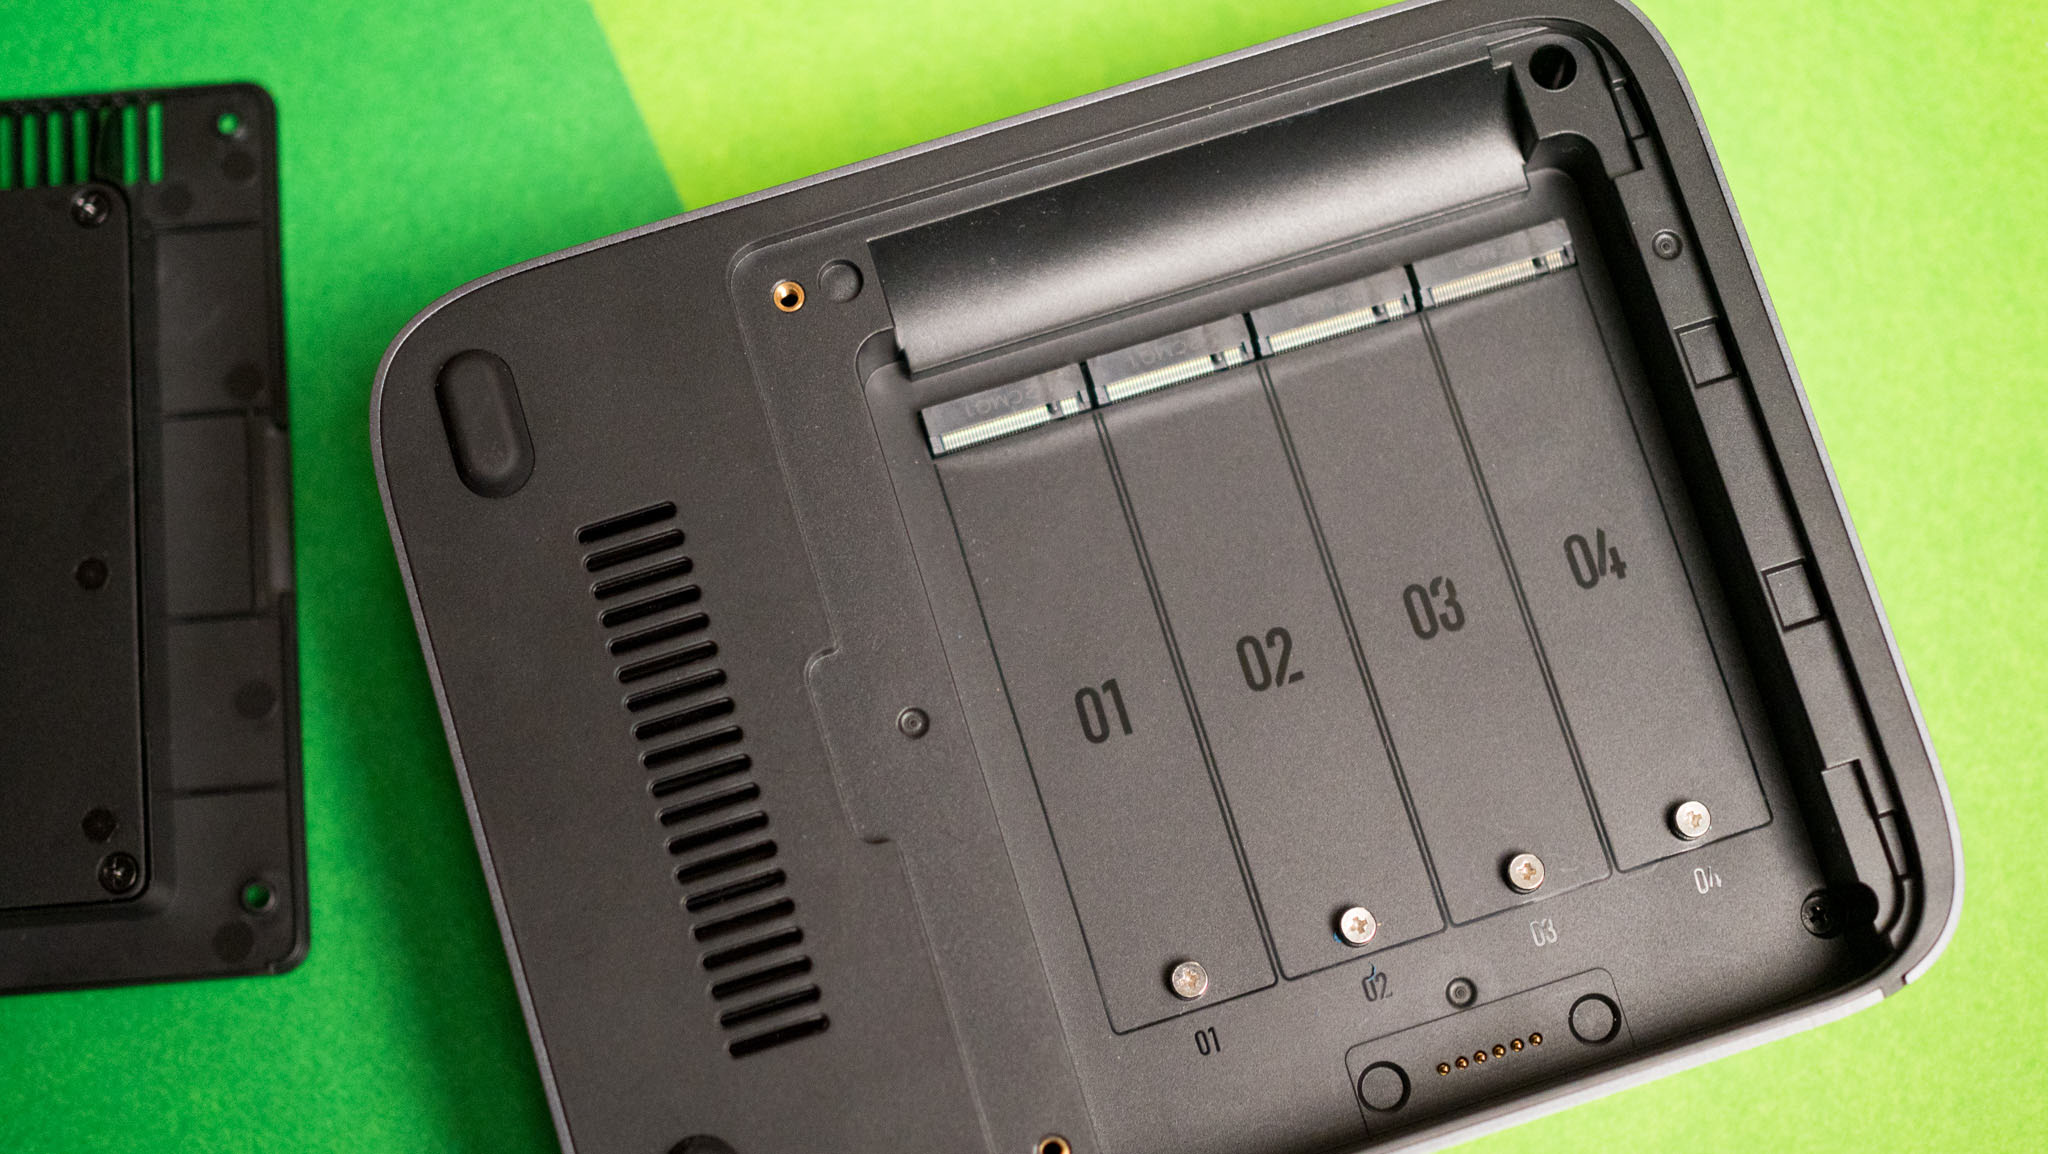 UGREEN DXP480T Plus review: This Thunderbolt 4-enabled all-flash NAS server is magnificent